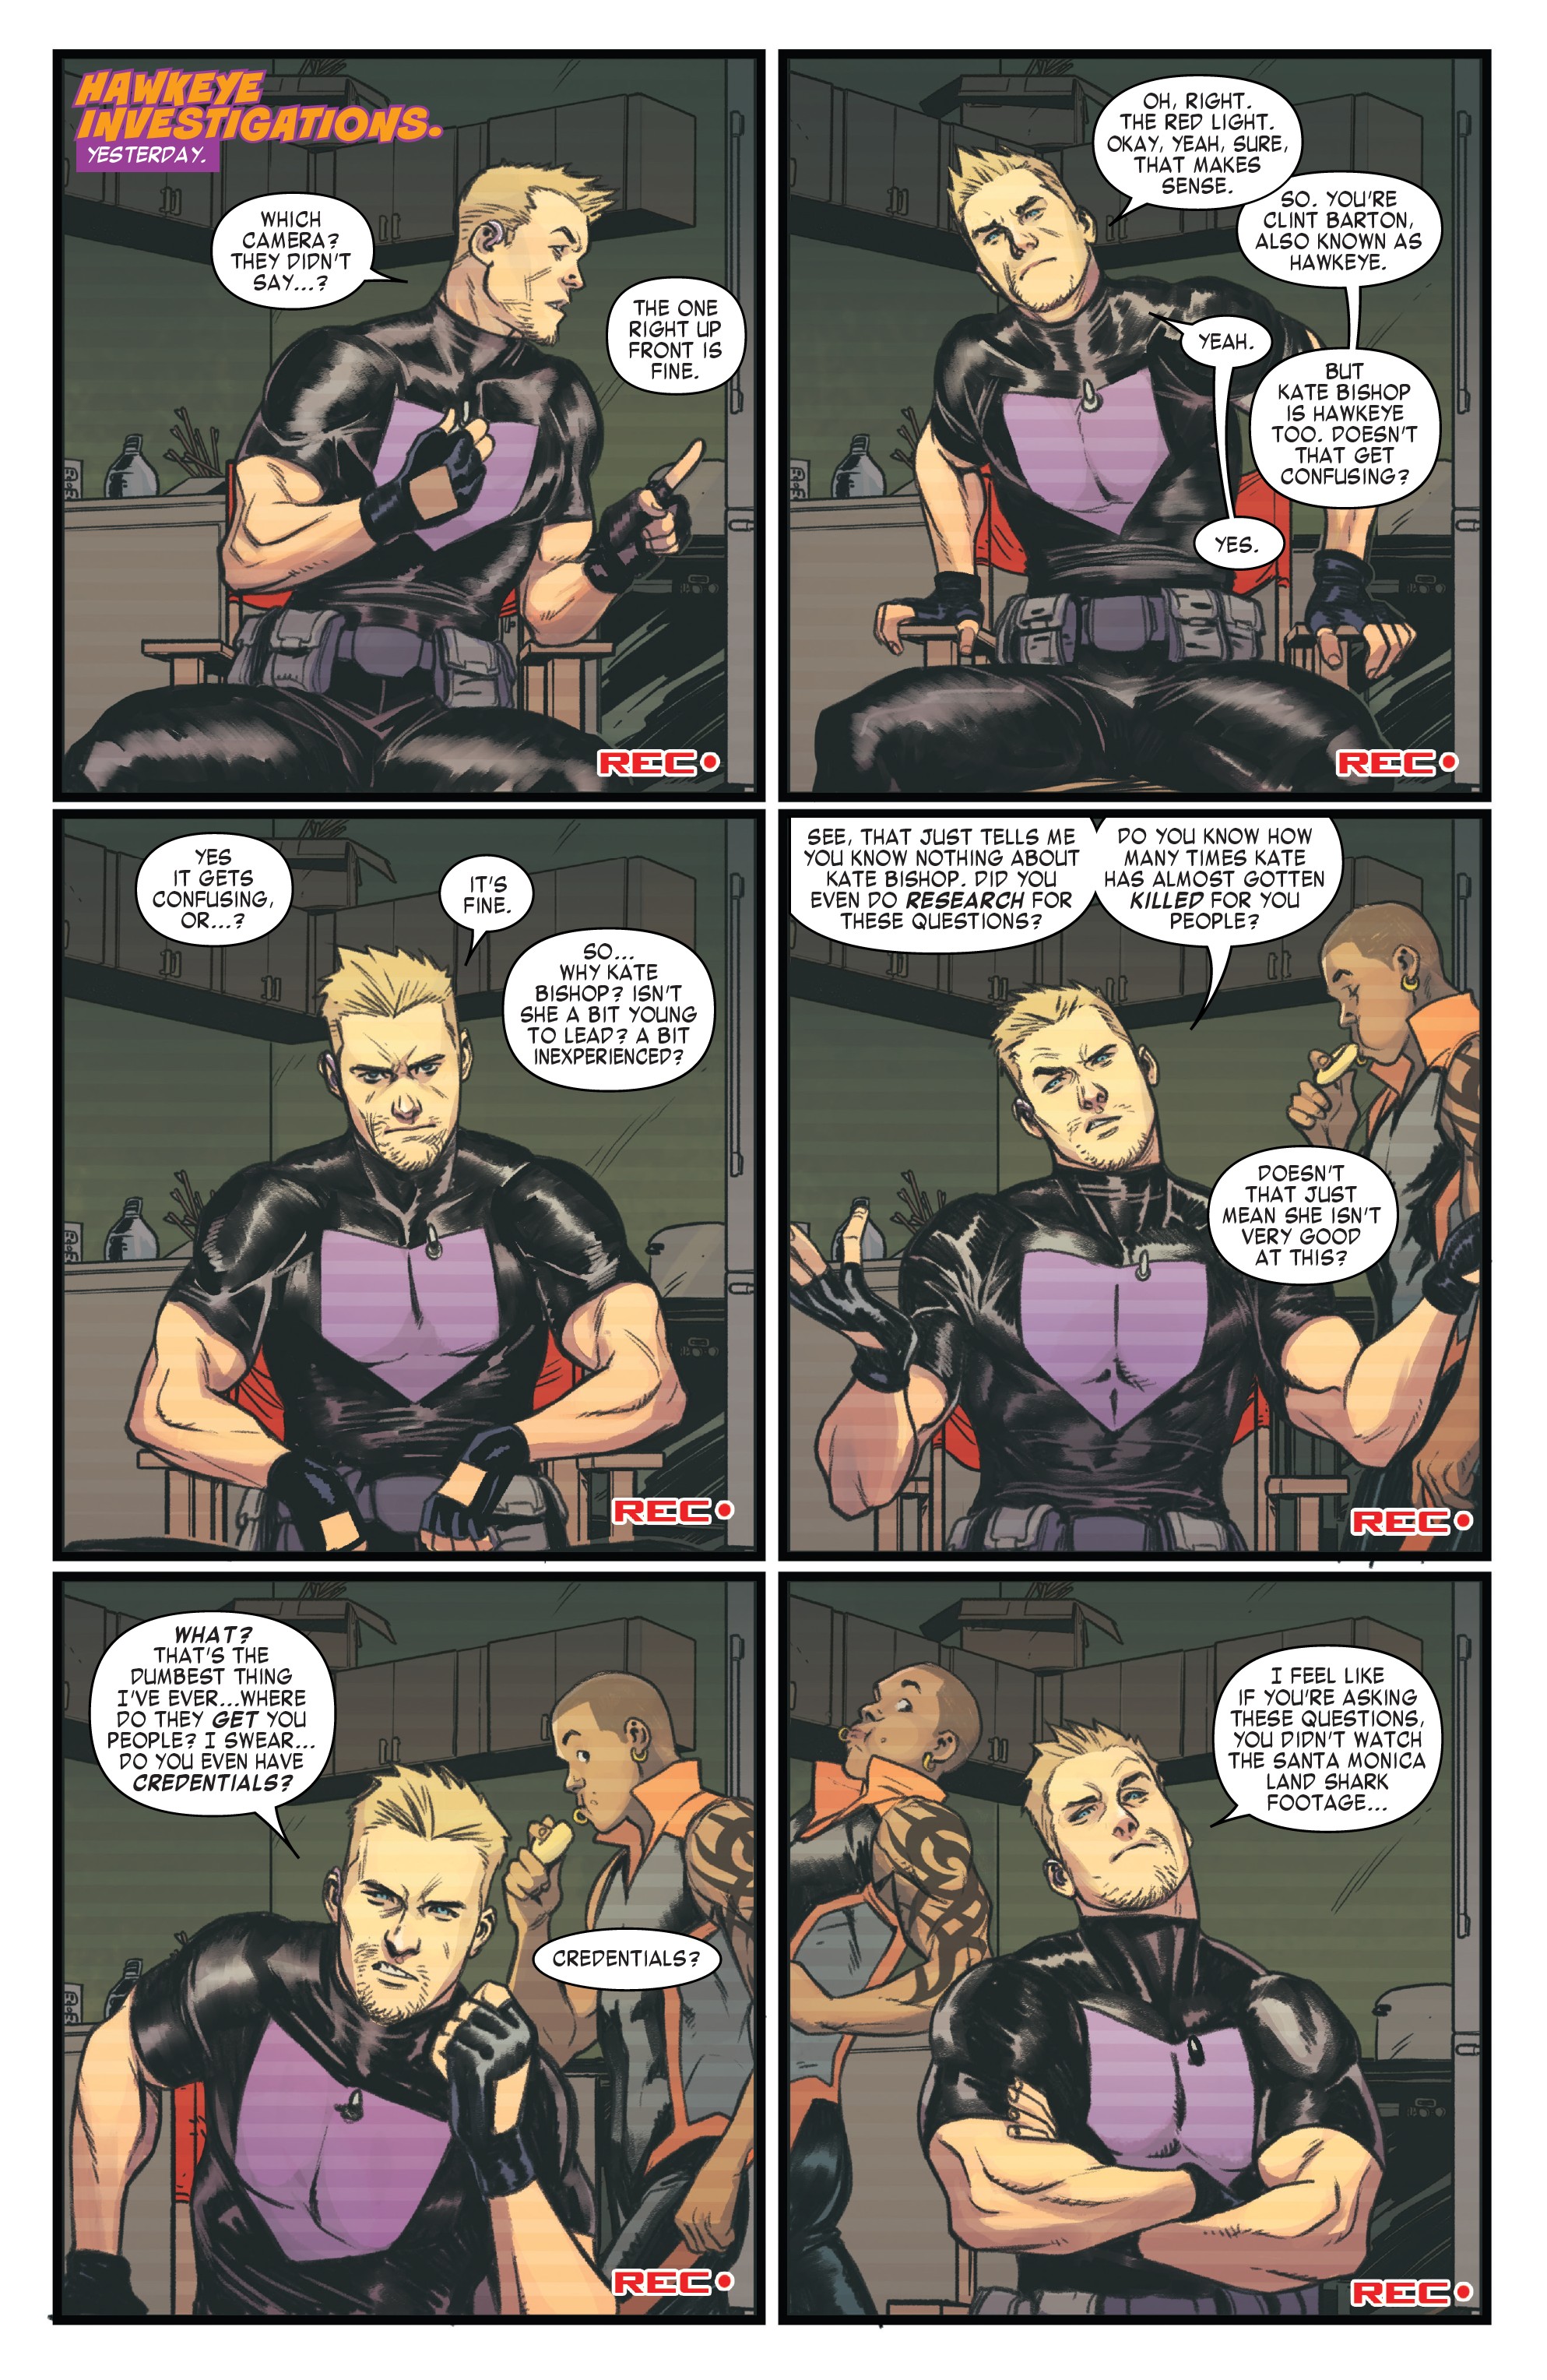 West Coast Avengers (2018-): Chapter 1 - Page 3